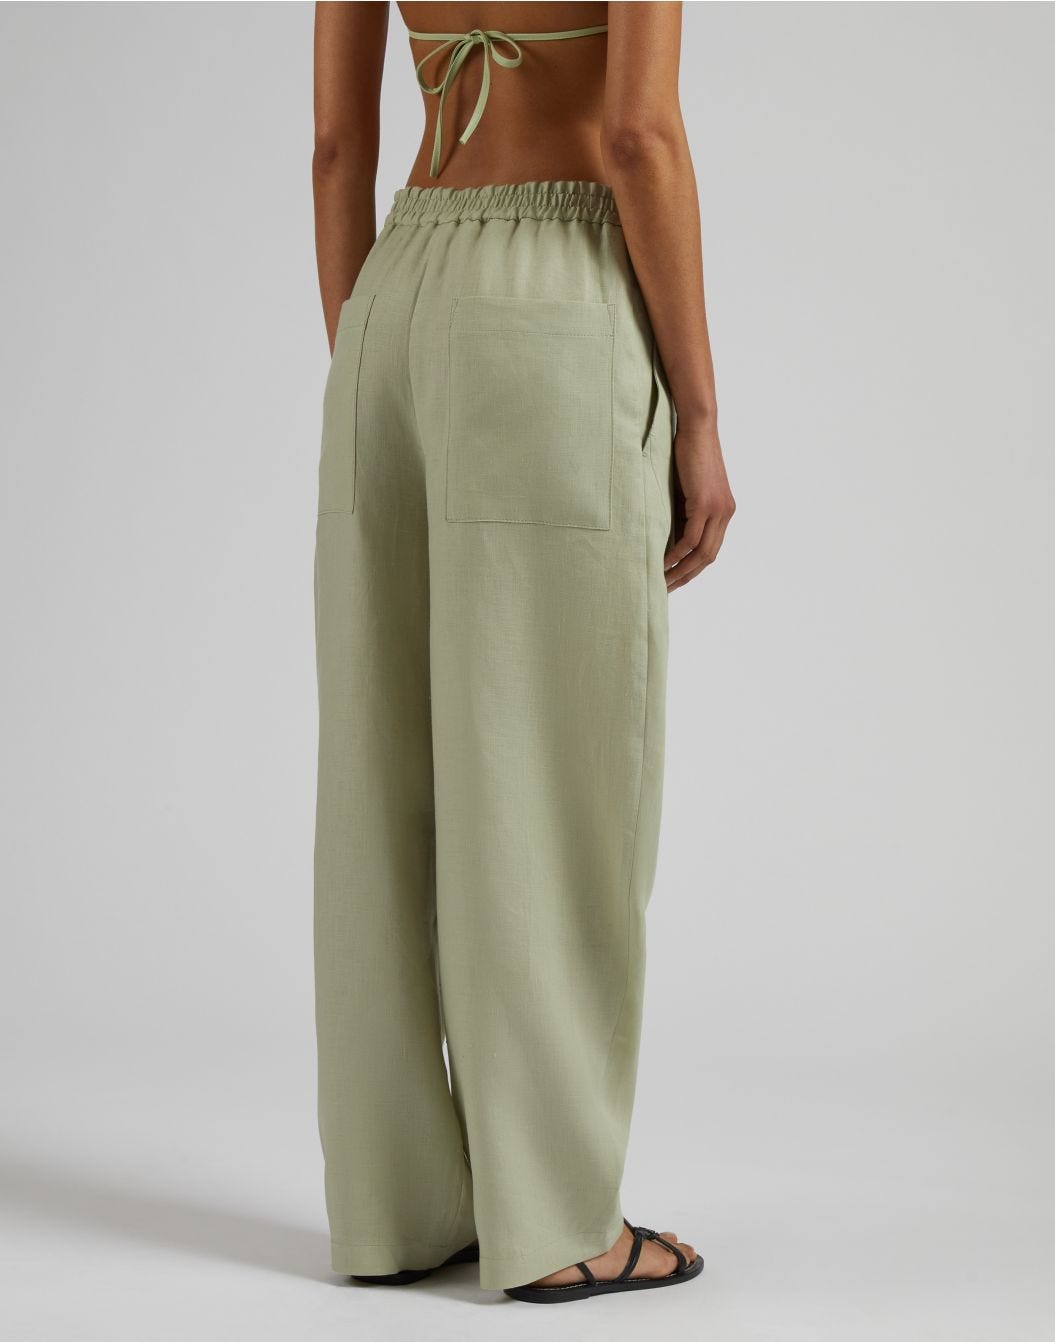 Green linen cloth loose-fitting, low-waisted trousers